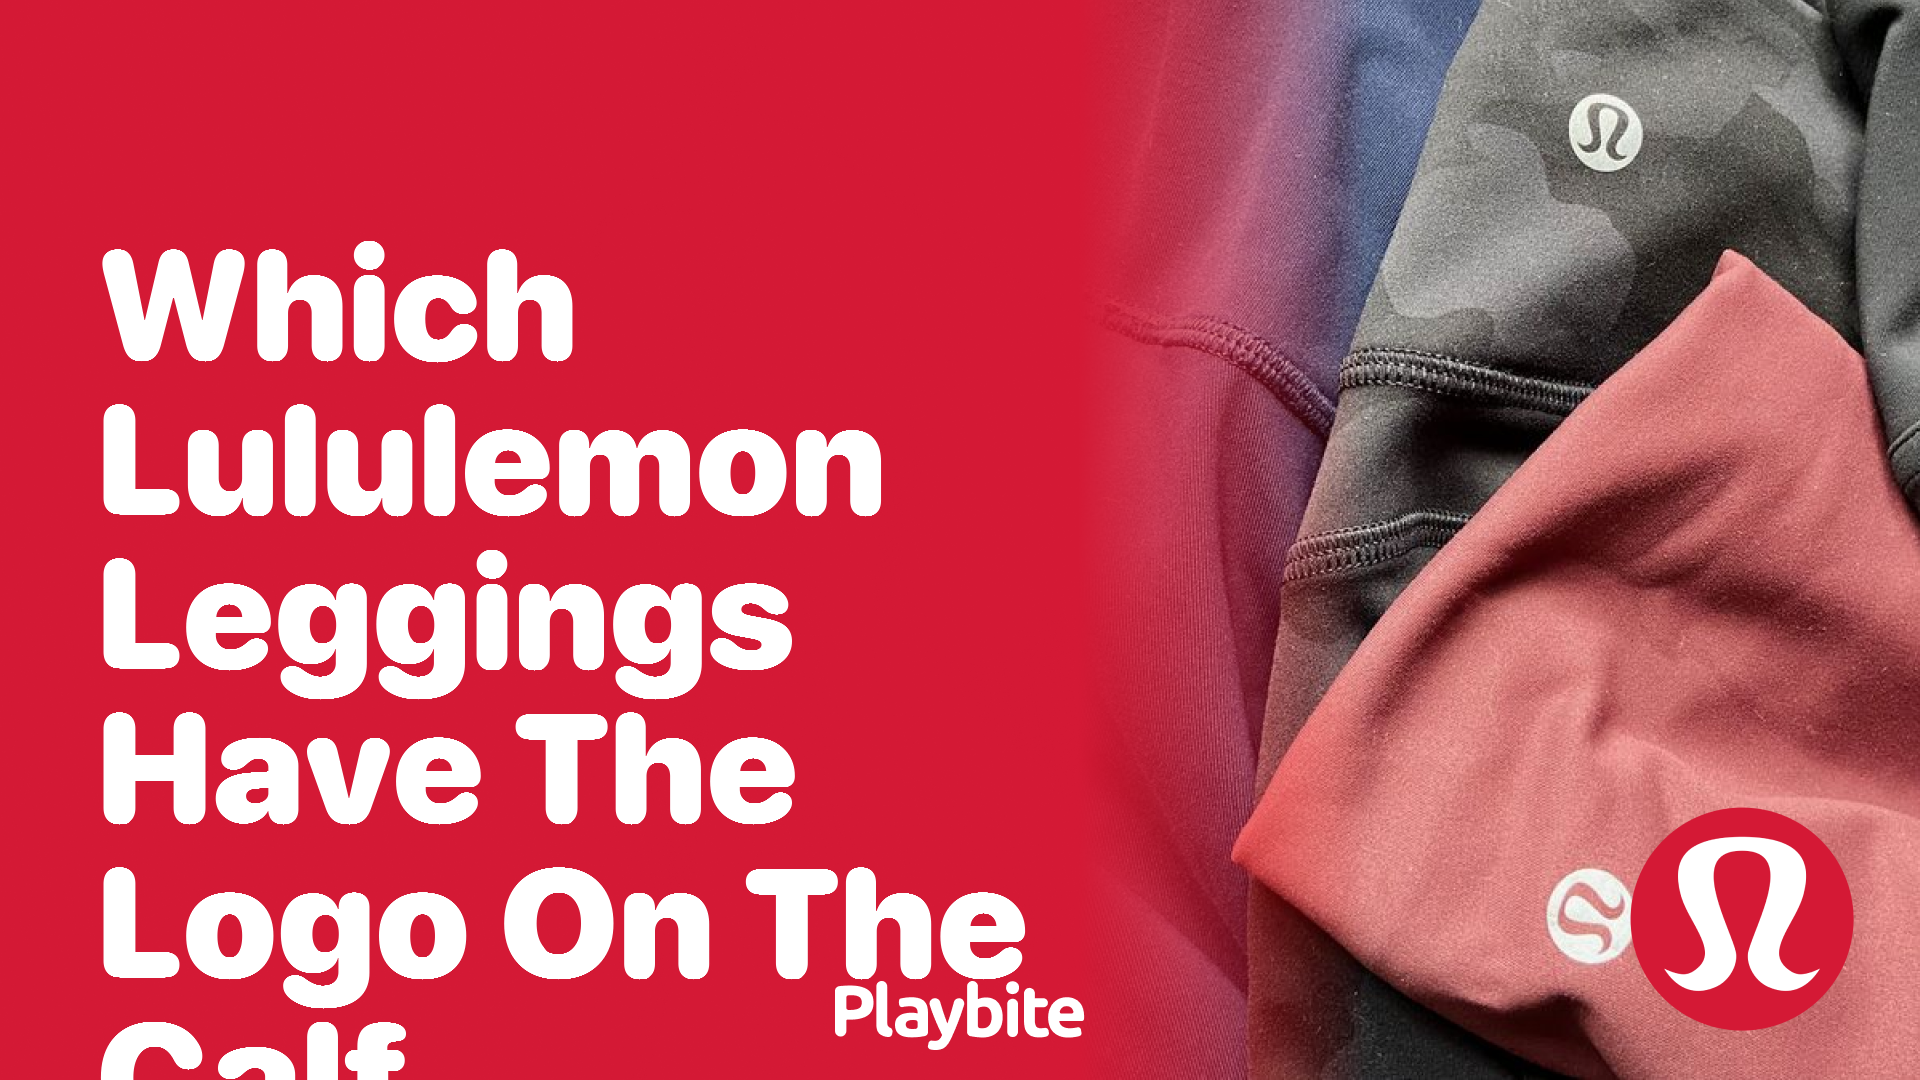 Which Lululemon Leggings Have the Logo on the Calf? - Playbite